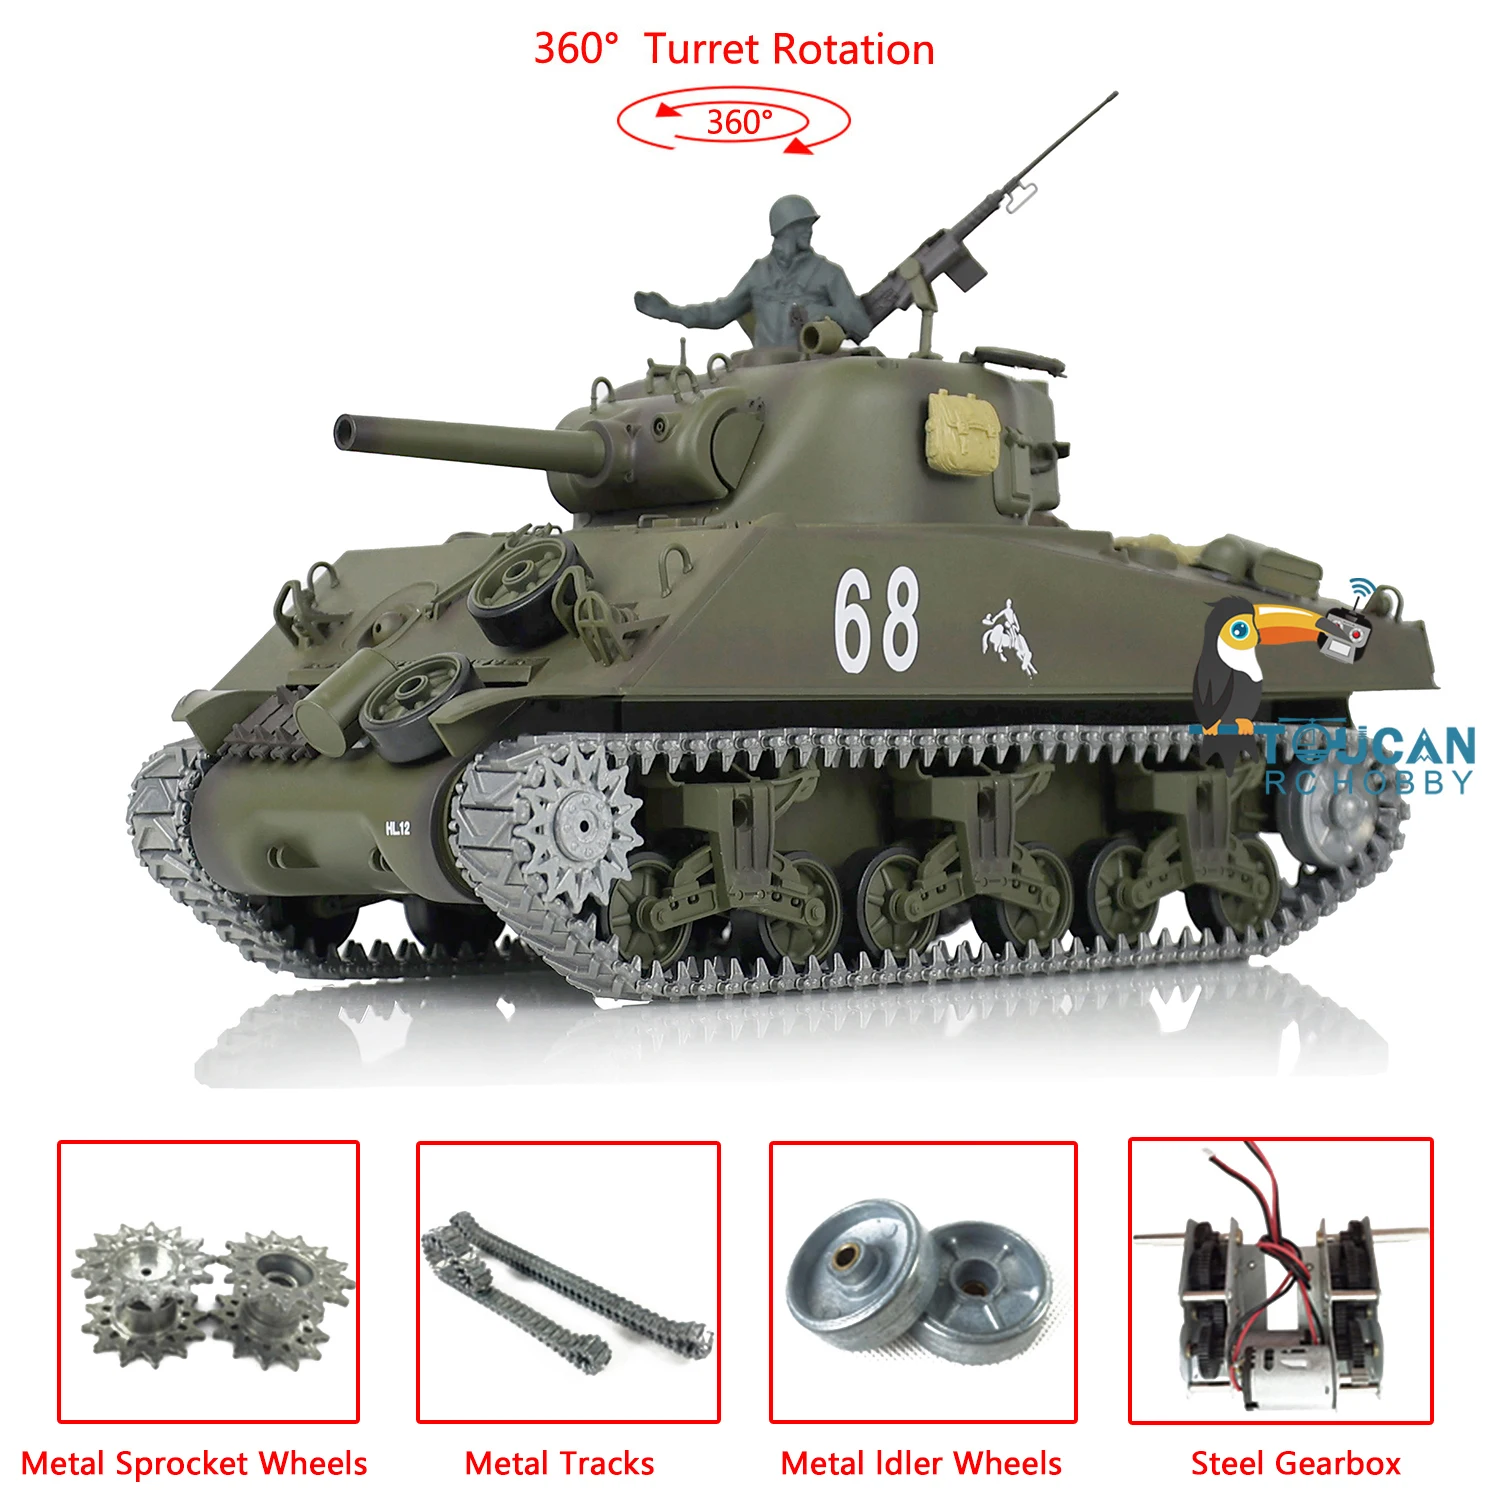 

Henglong 1/16 Scale 7.0 Upgraded Ver M4A3 Sherman RTR RC Tank 3898 W/ 360° Turret Battle Simulation Metal Tracks TH17675-SMT7